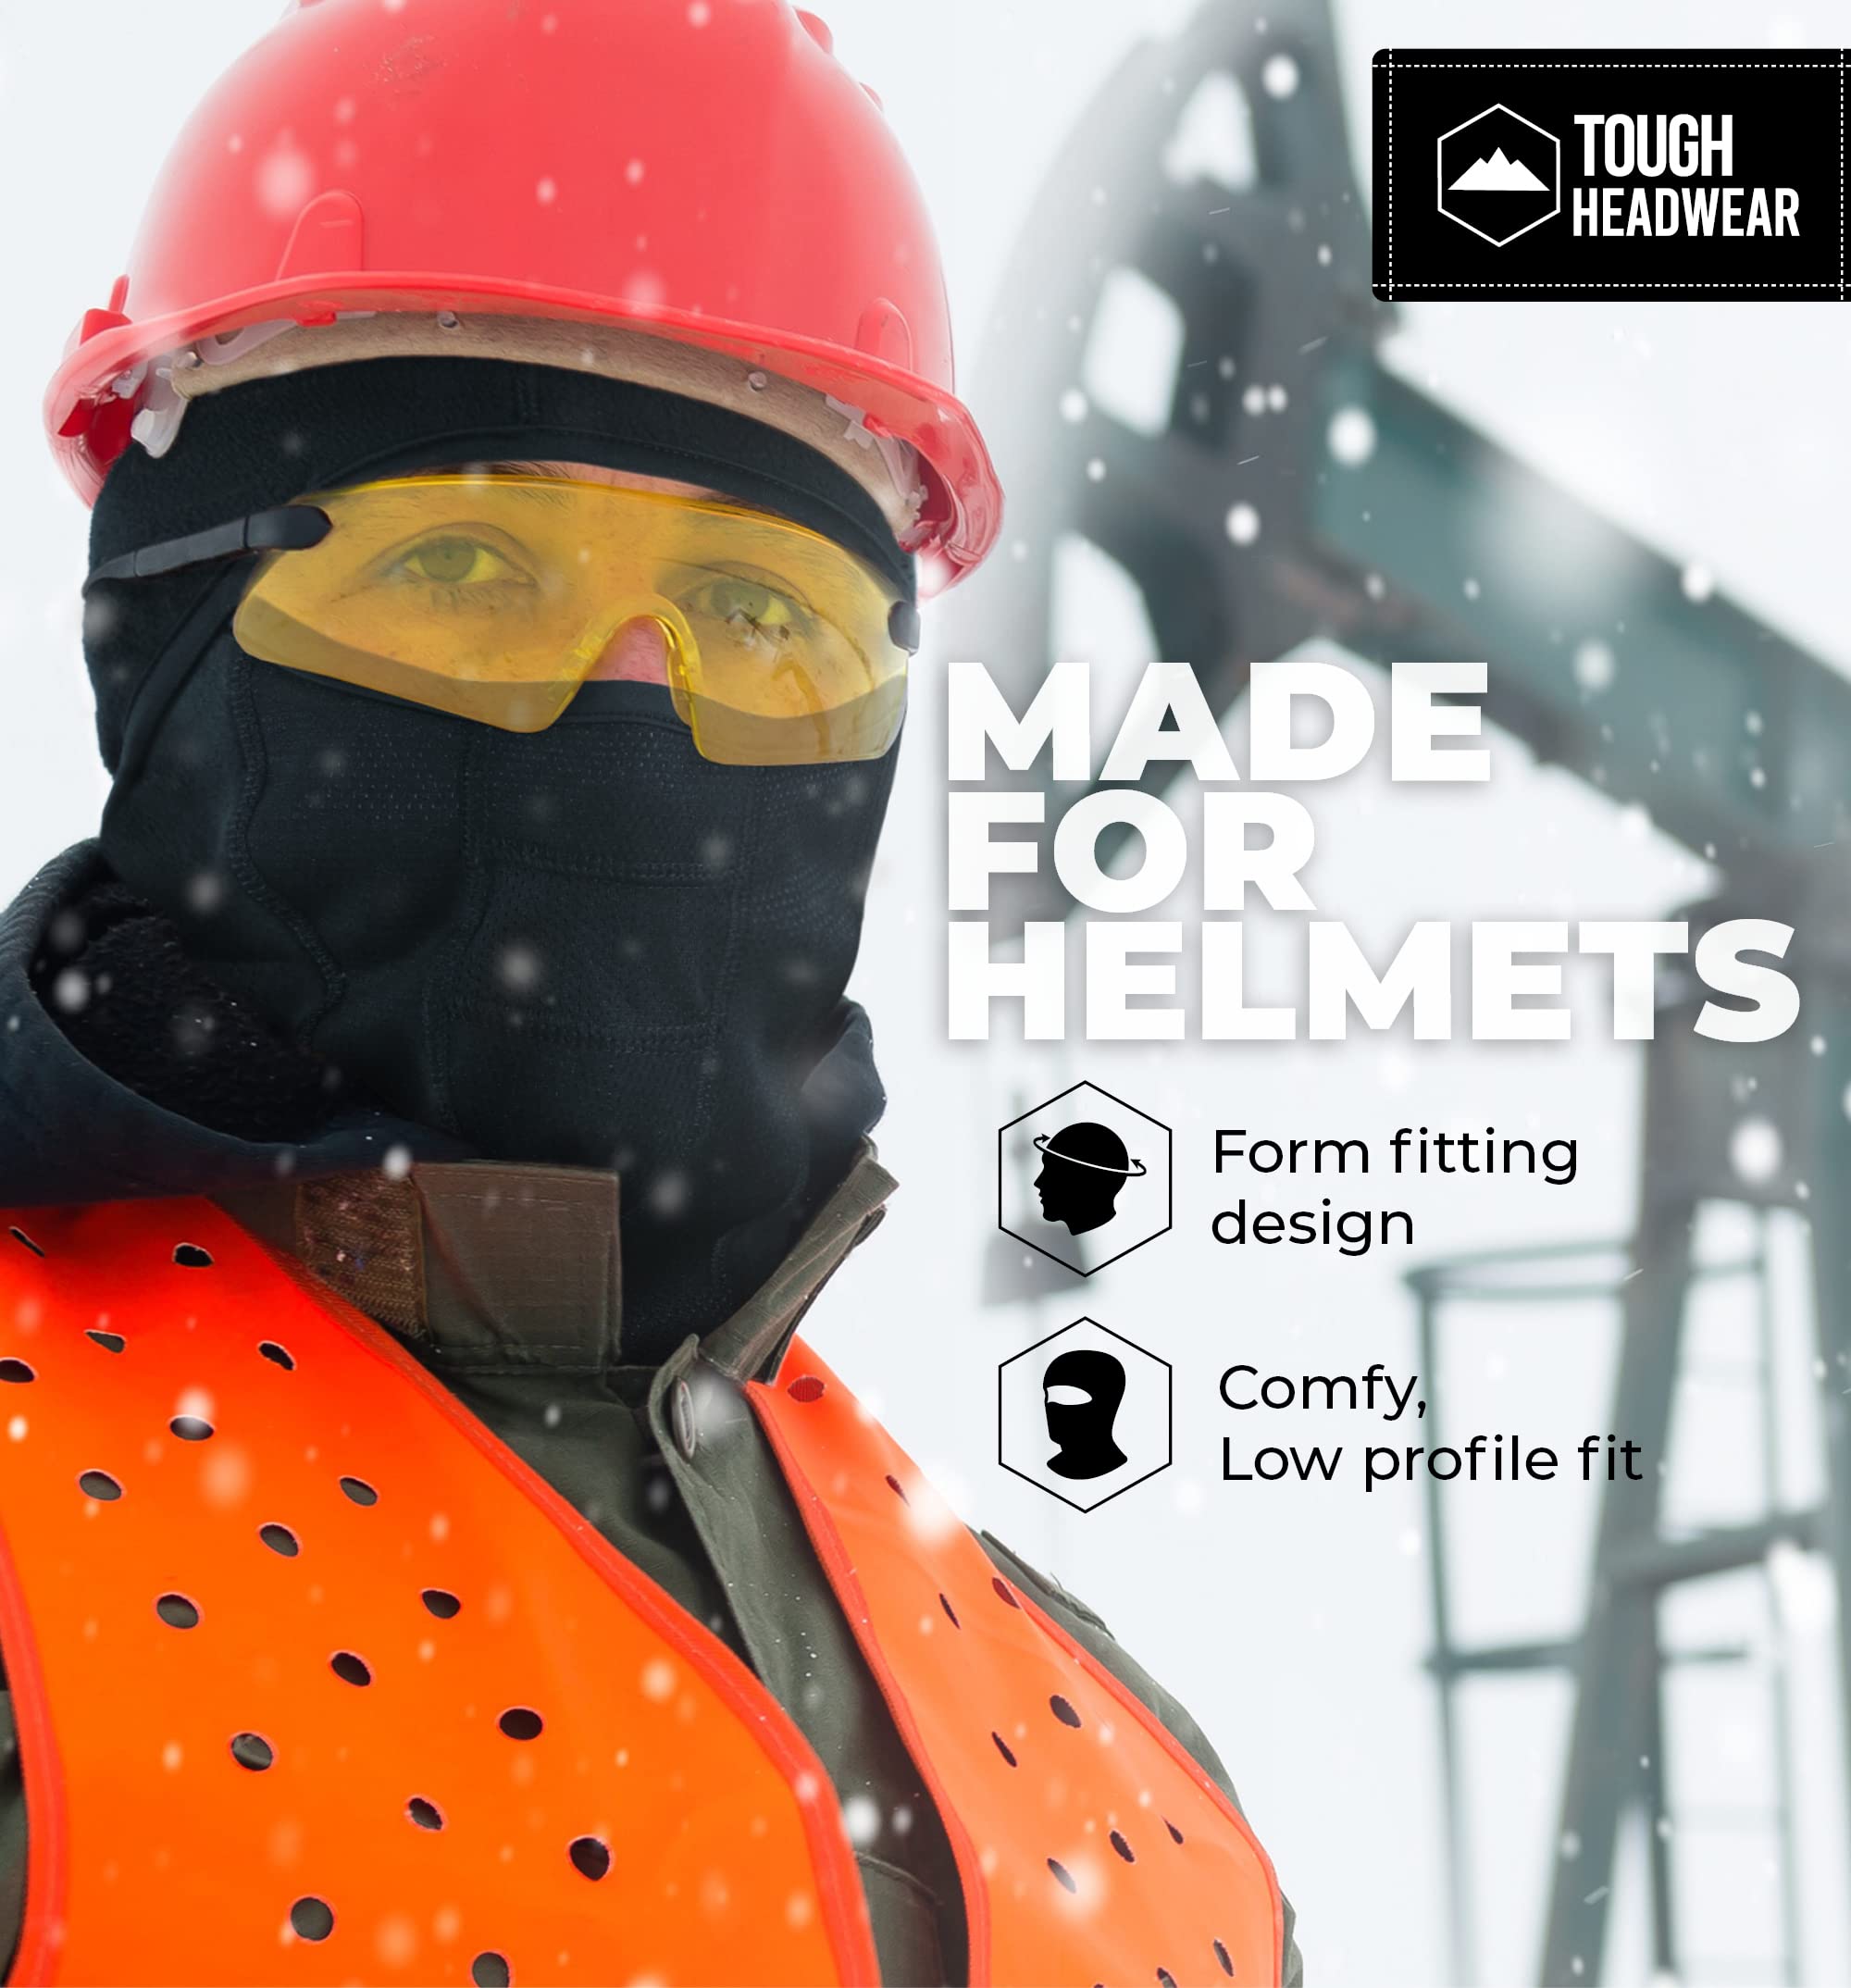 Full Face Mask for Cold Weather for Men - Work Balaclava Winter Head Cover, Face Mask for Construction Workers - Motorcycle & Construction Head Gear